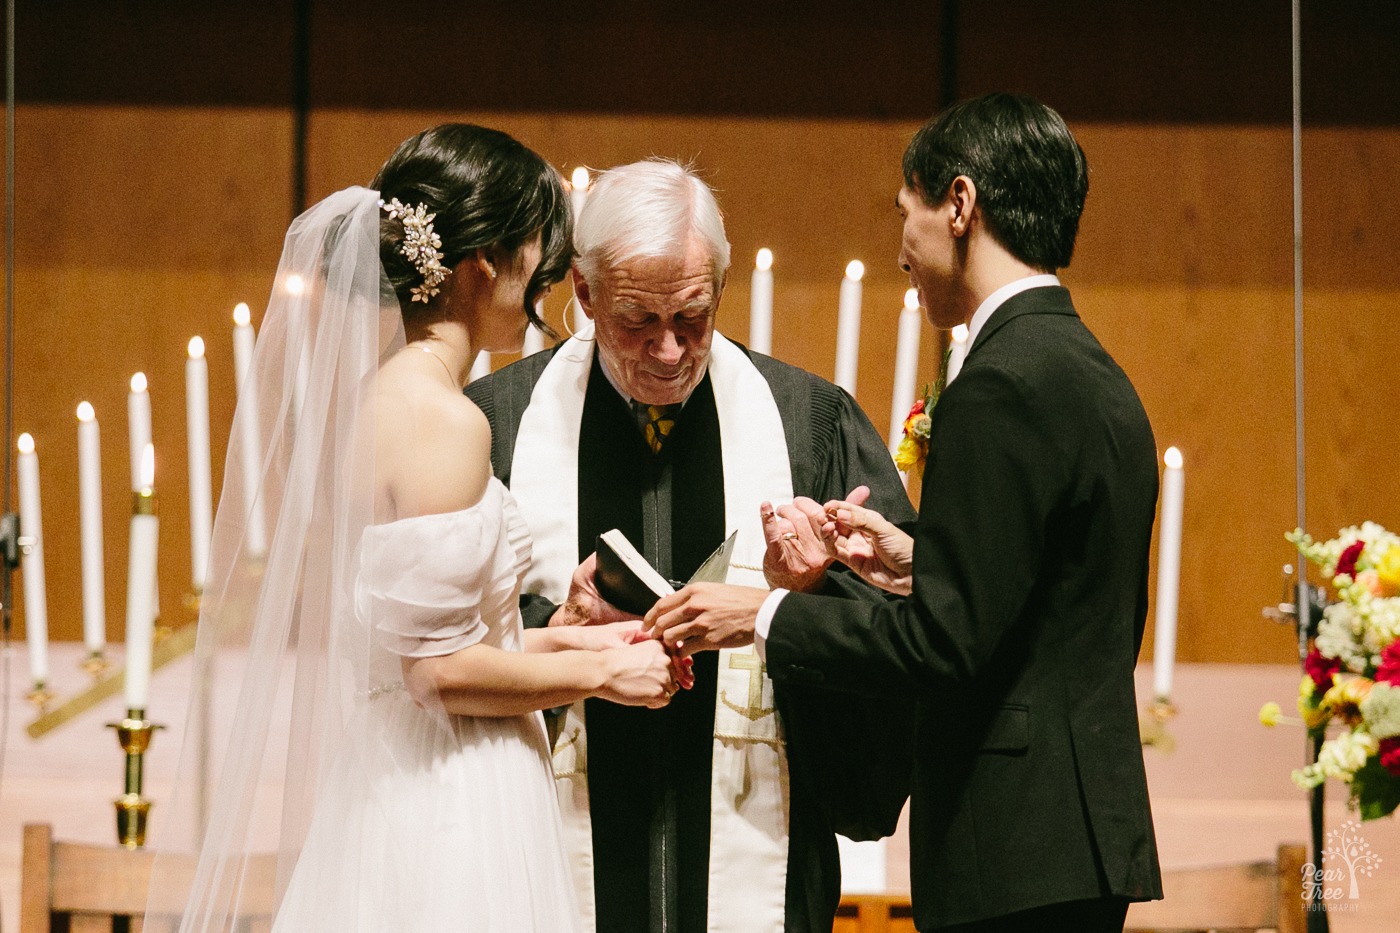 Officiant handing ring to Asian groom at Eastminster Presbyterian Church during wedding ceremony